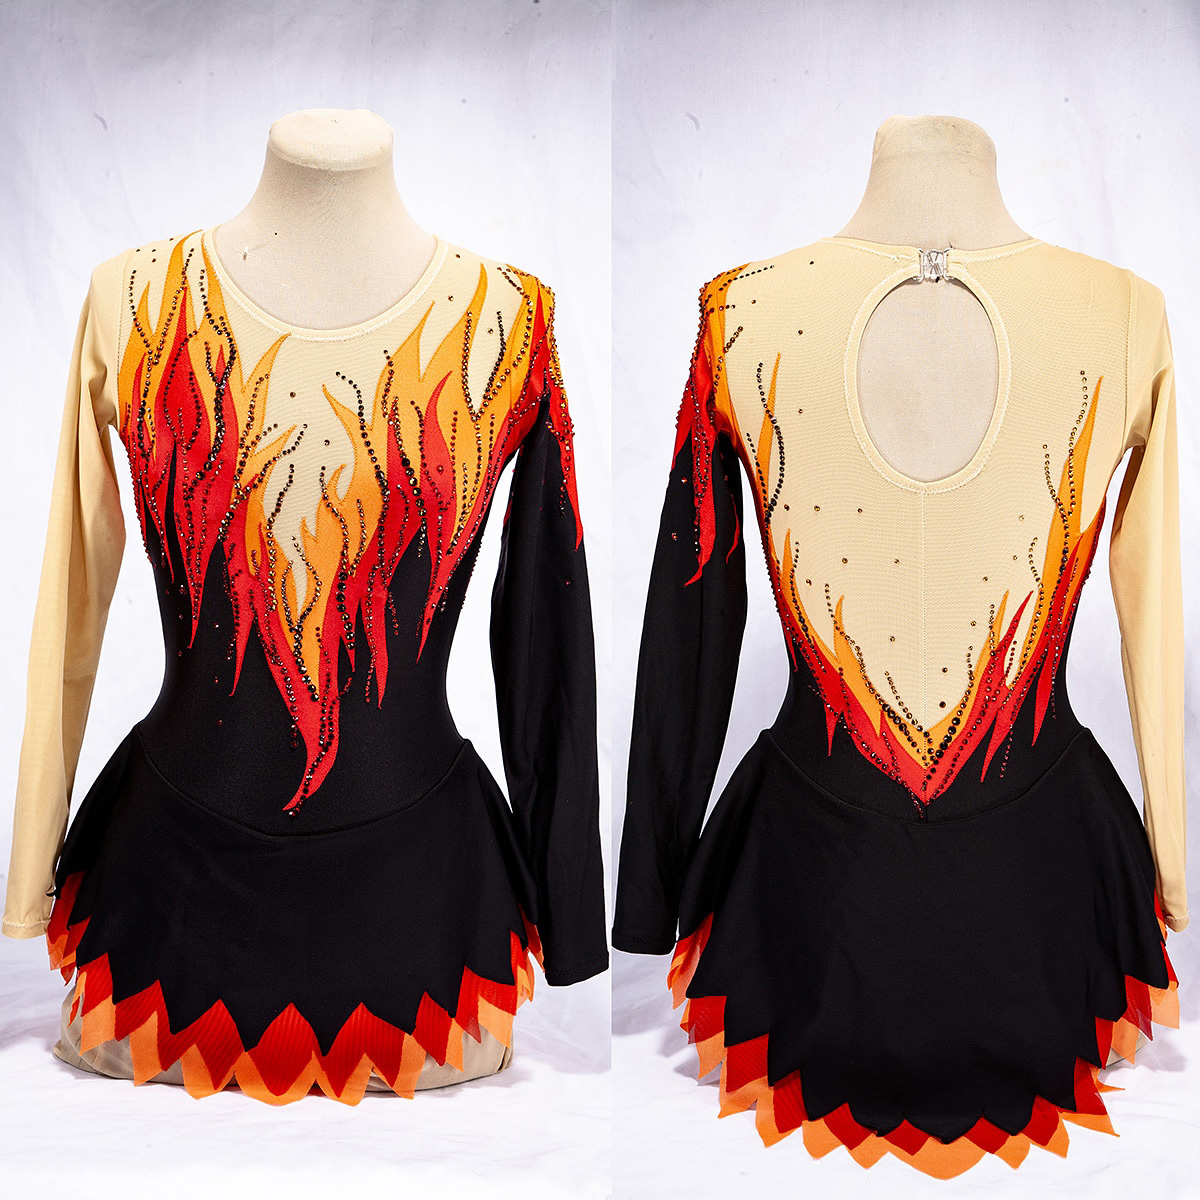 Front and back views of a flames design figure skating dress on a dress form.